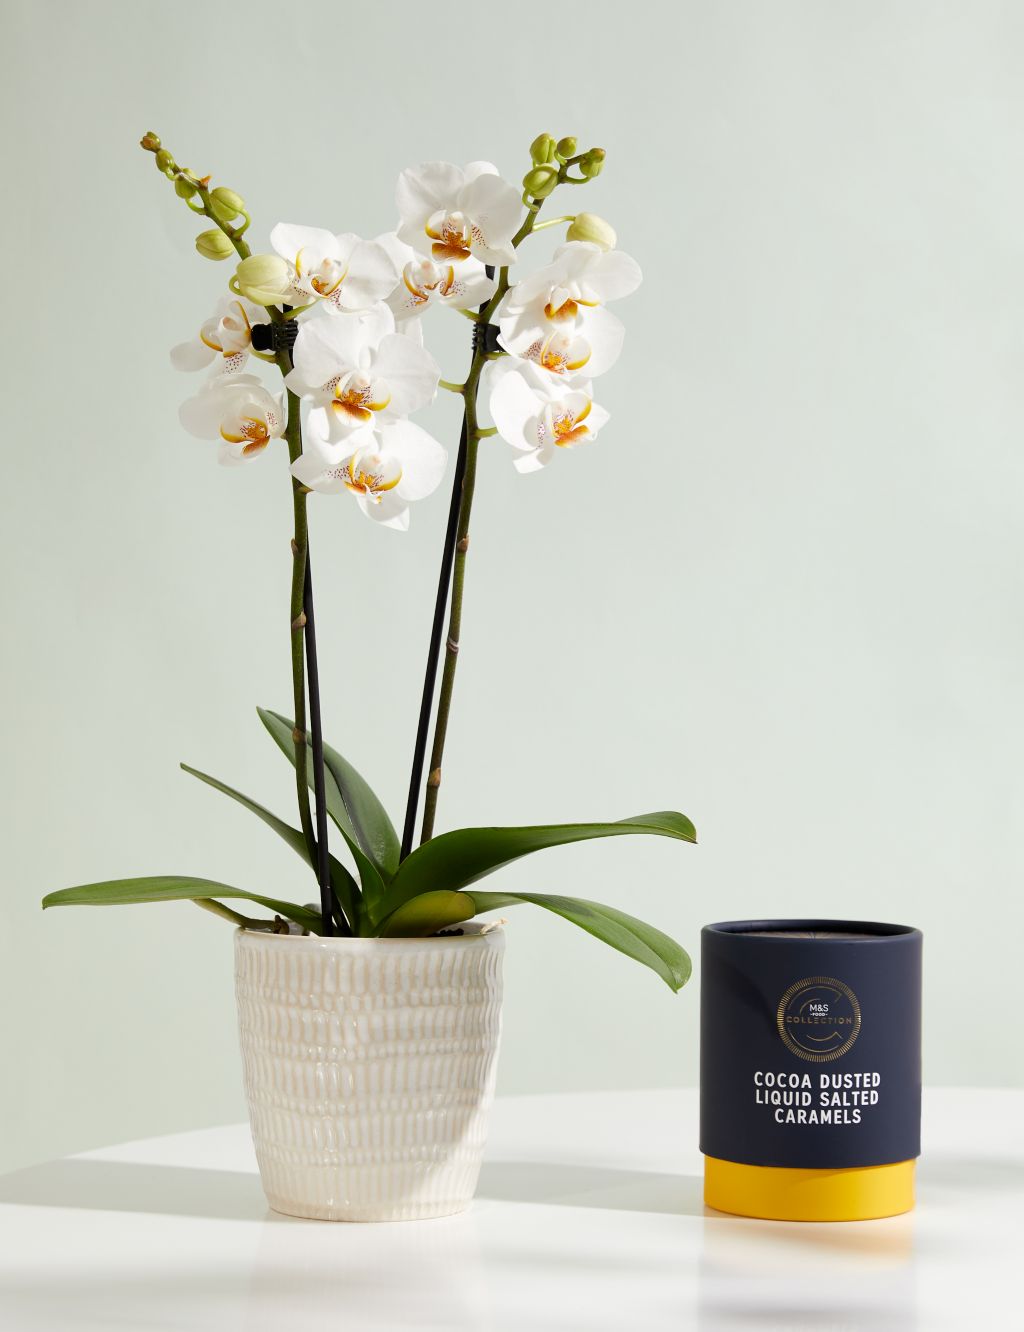 Miniature White Phalaenopsis Orchid Ceramic & Cocoa Dusted Liquid Salted Caramels Bundle